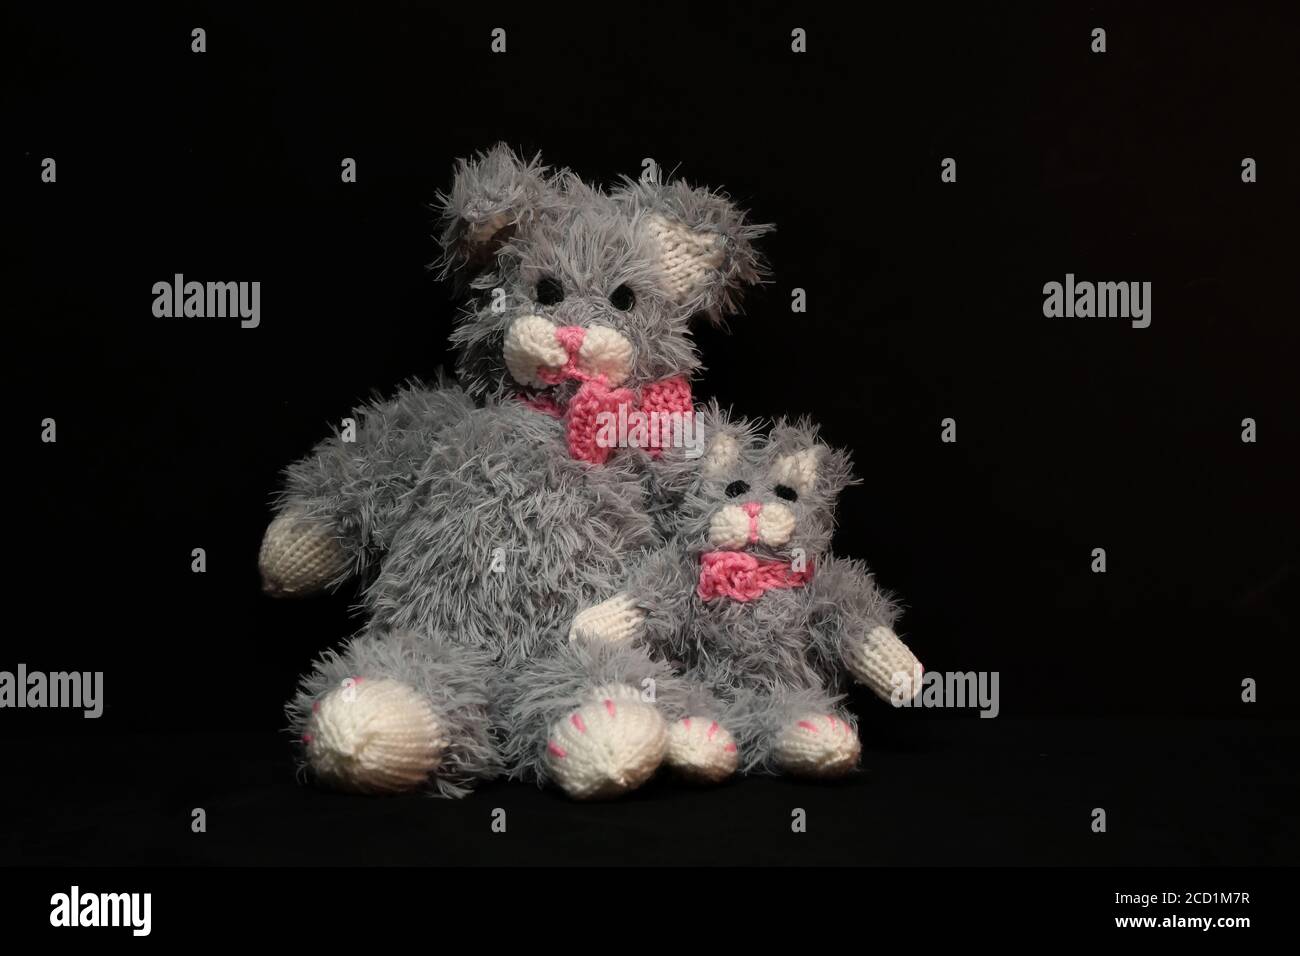 Closeup of two knitted gray bears on a black background Stock Photo